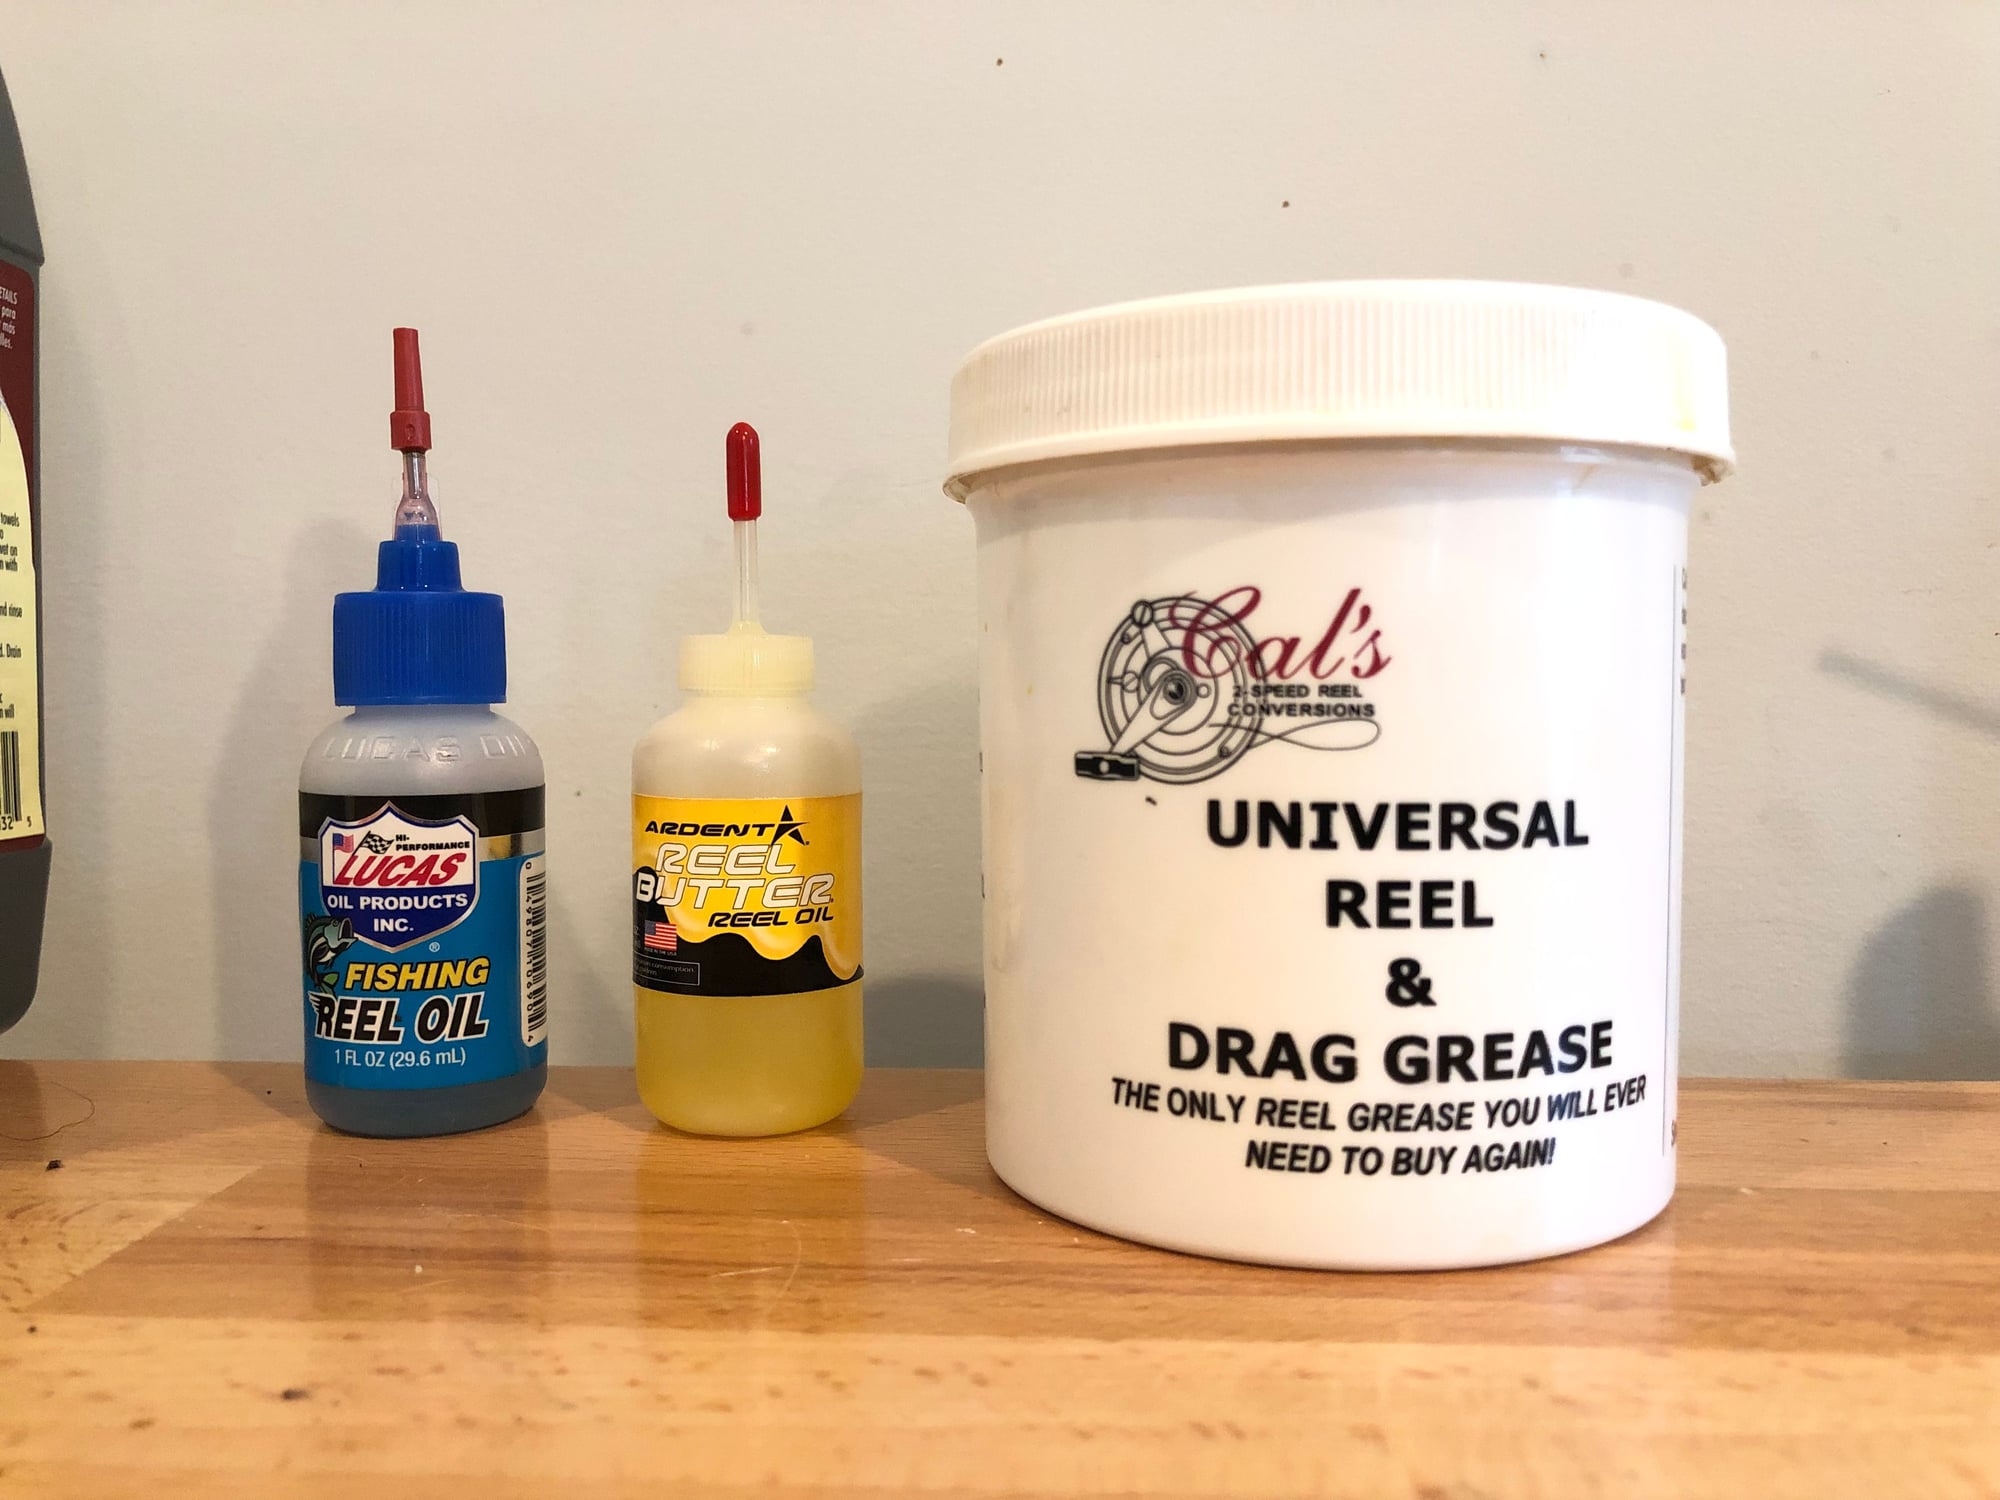 Pete's Reel Repair - Page 6 - The Hull Truth - Boating and Fishing Forum